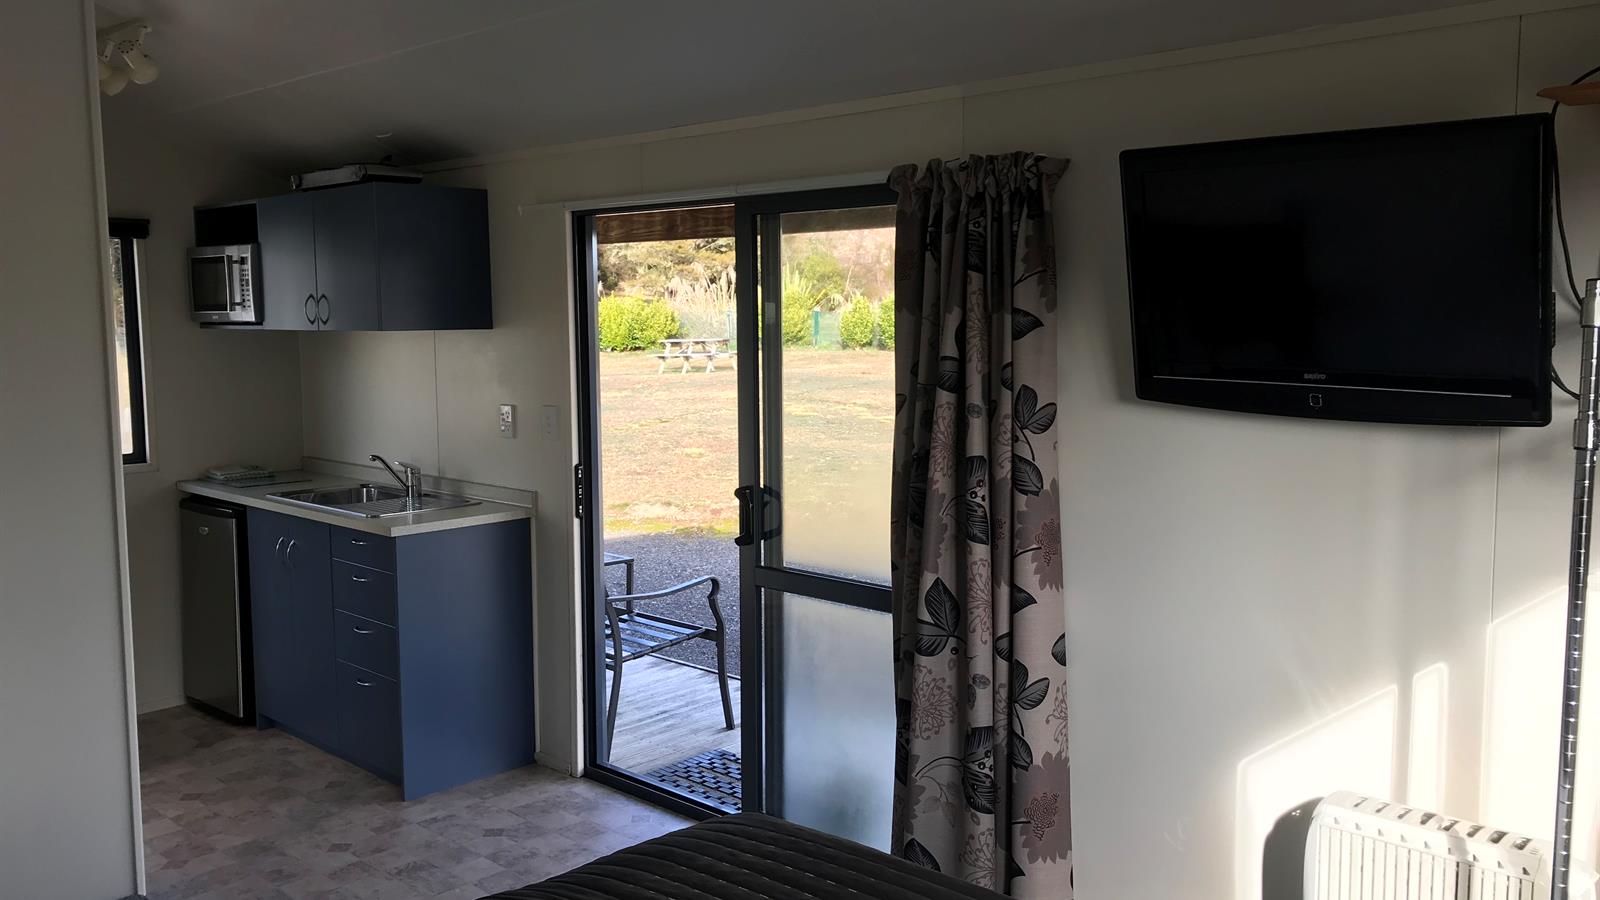 Nice Self Contained Units
Tongariro Holiday Park